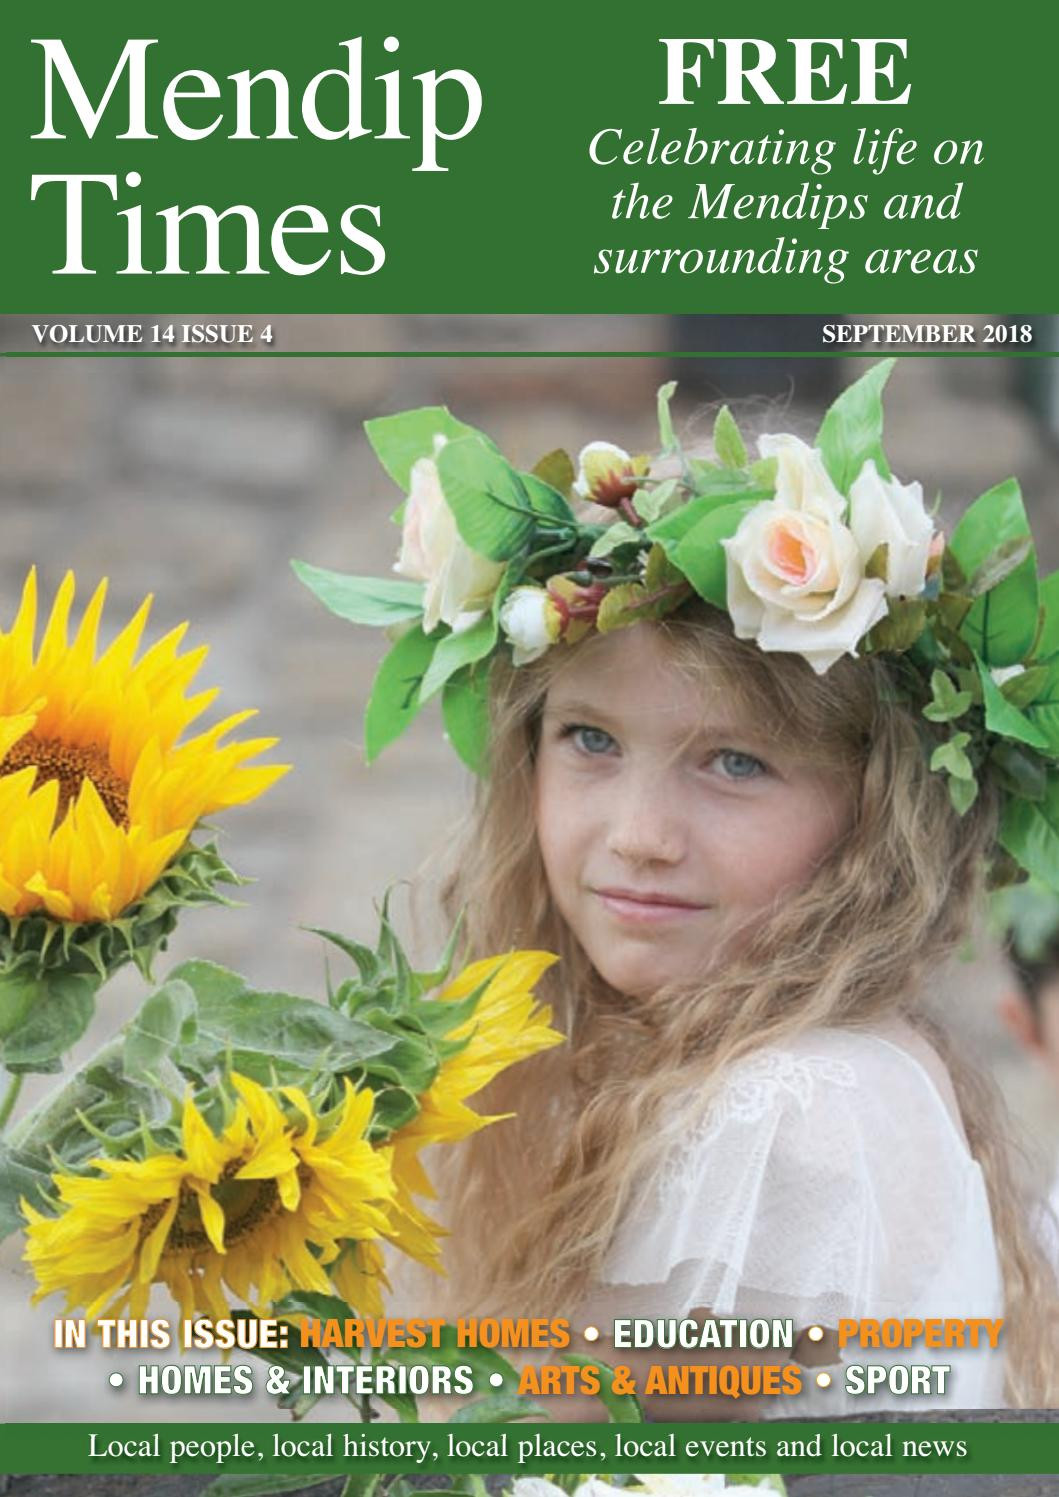 judith stiles vase of issue 4 volume 14 mendip times by media fabrica issuu with page 1